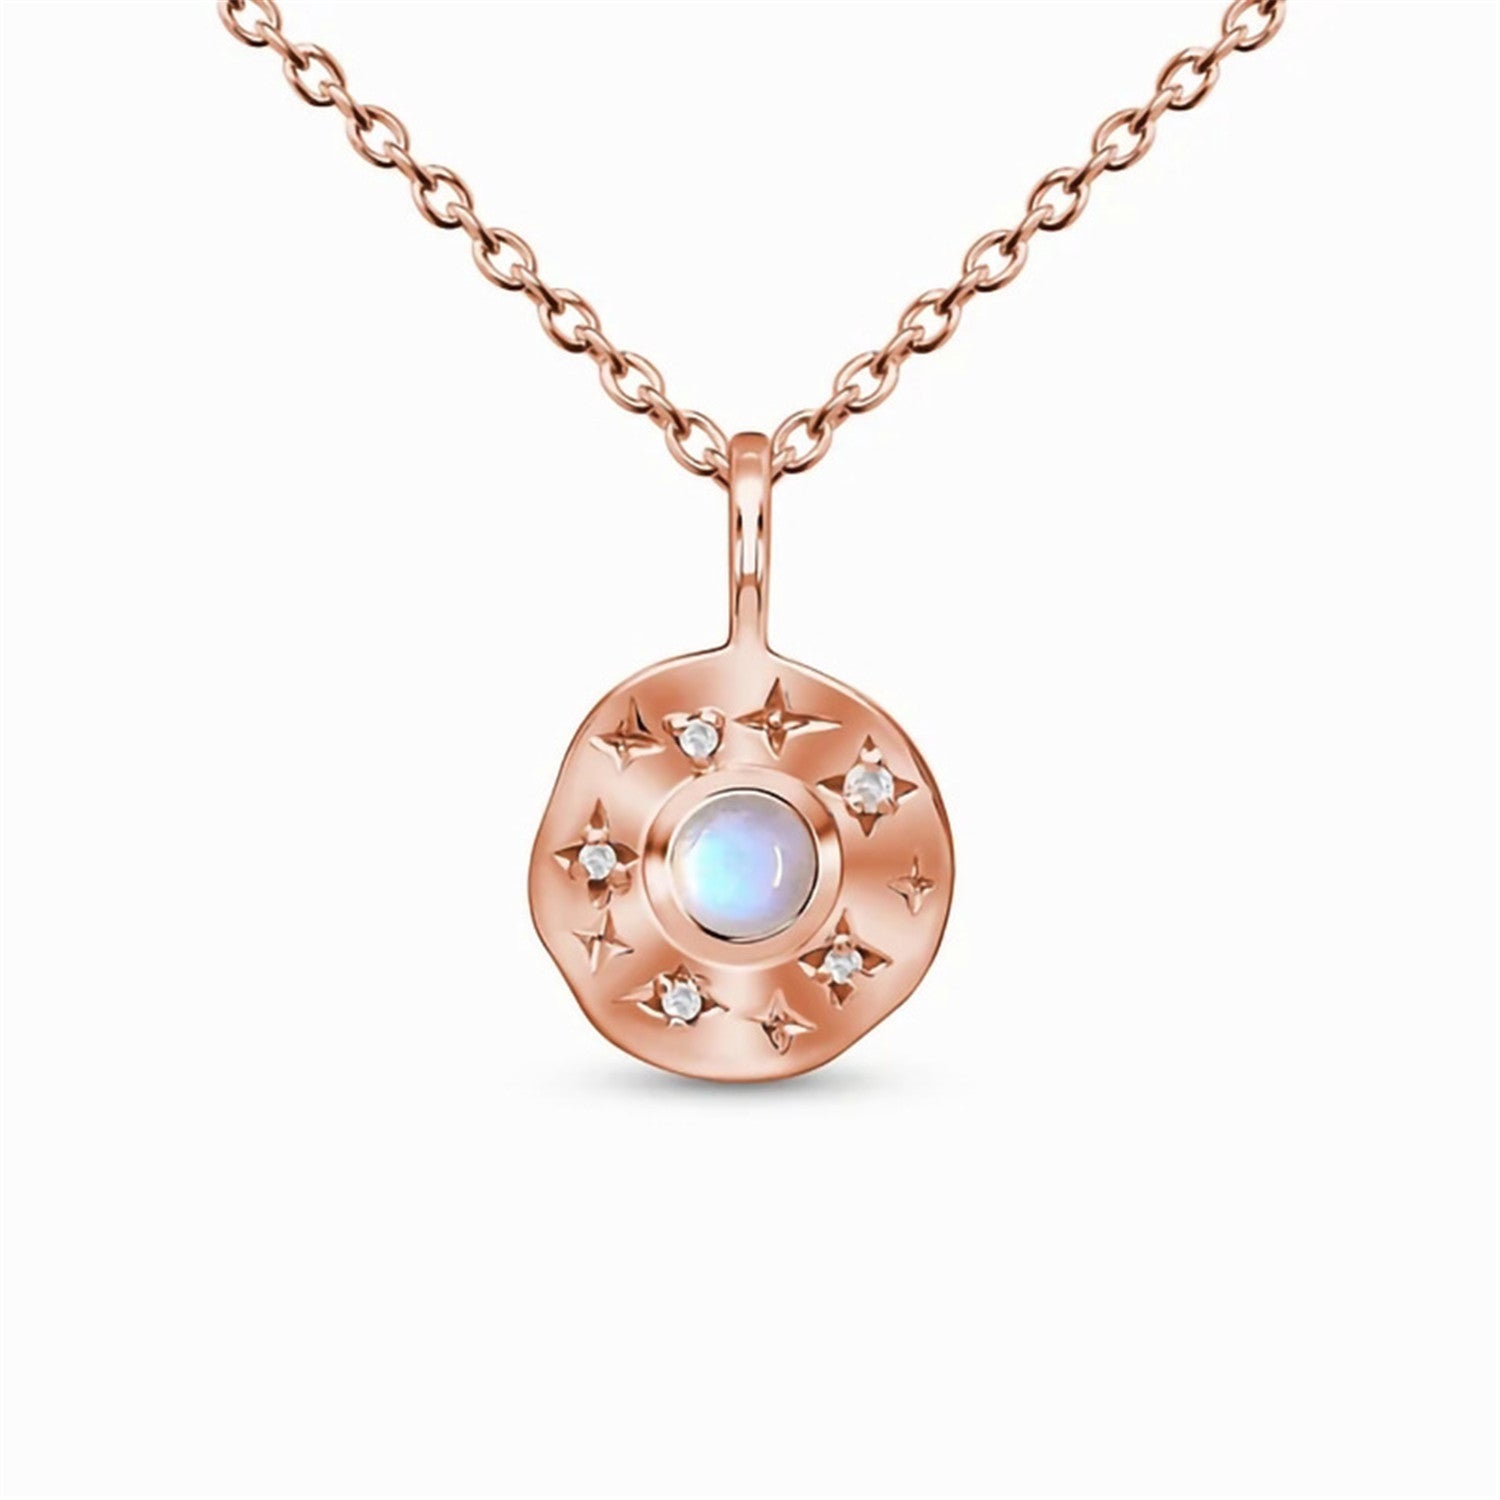 Moonstone Pendant,s925 Silver,With Medallion Design